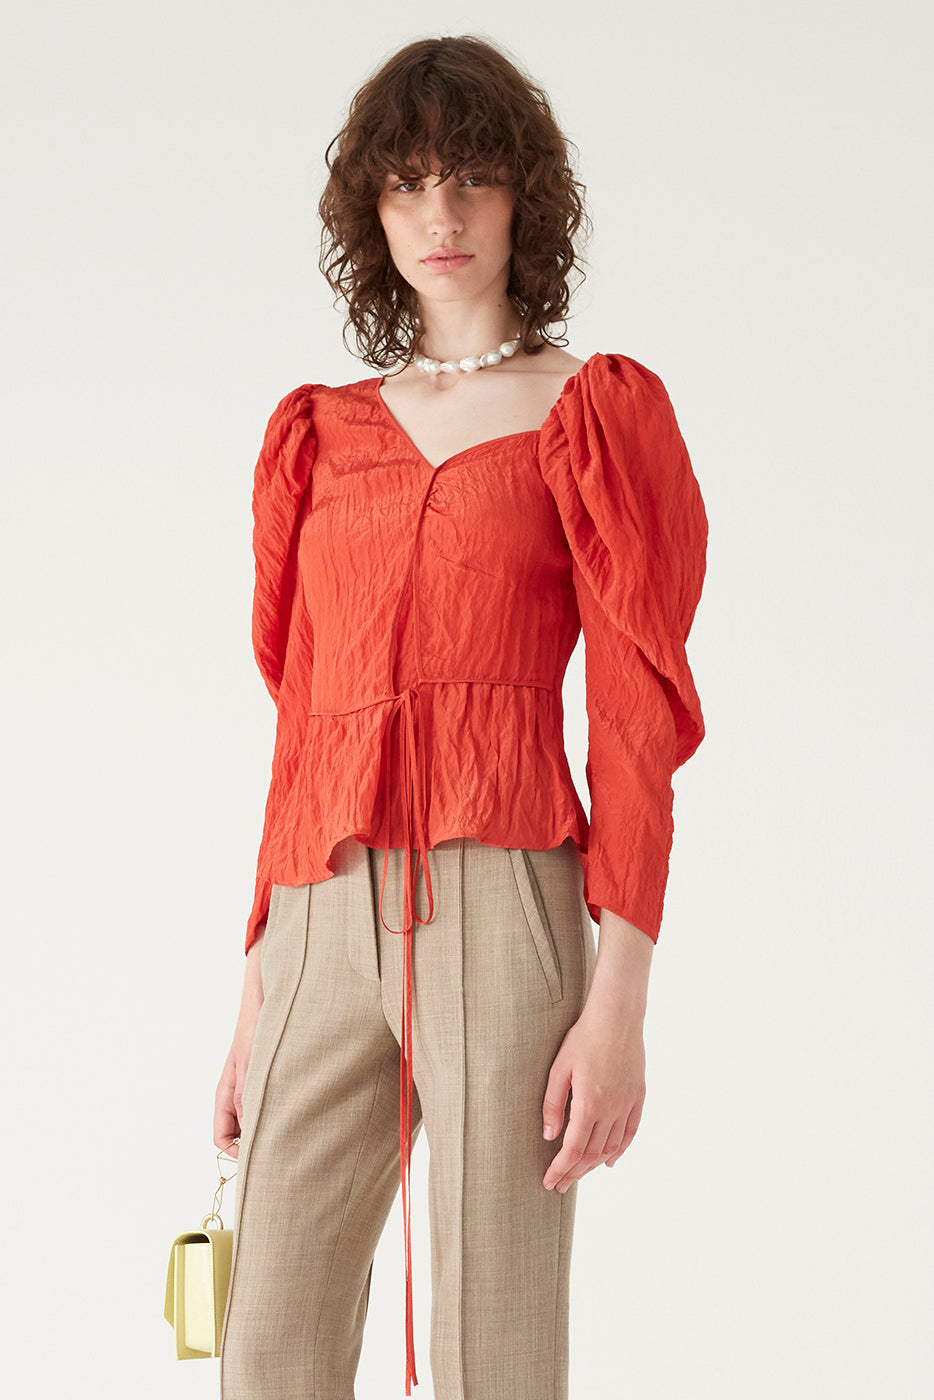 Fiona Blouse in Red Crinkle Satin by Rejina Pyo